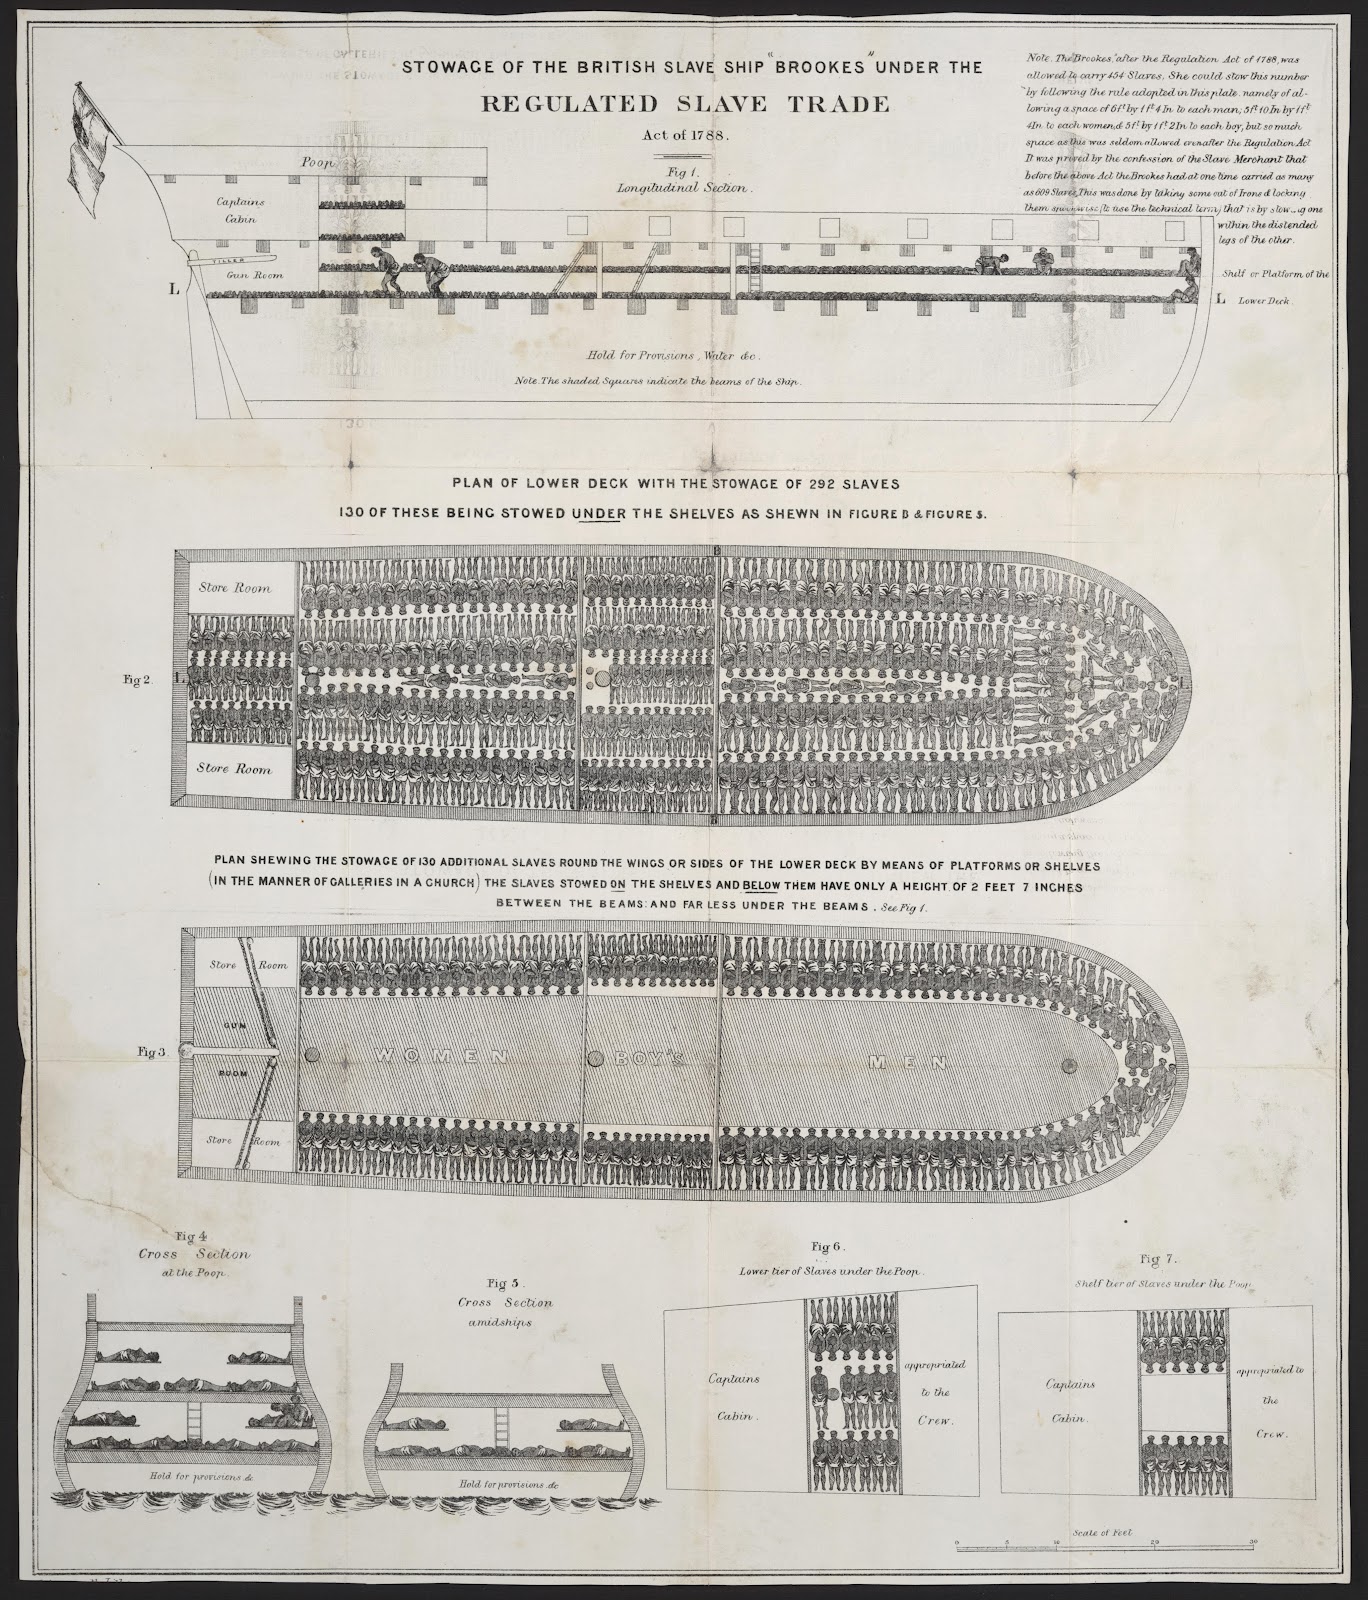 Stowage of the British Slave Ship "Brookes" Under the Regulated Slave Trade Act of 1788